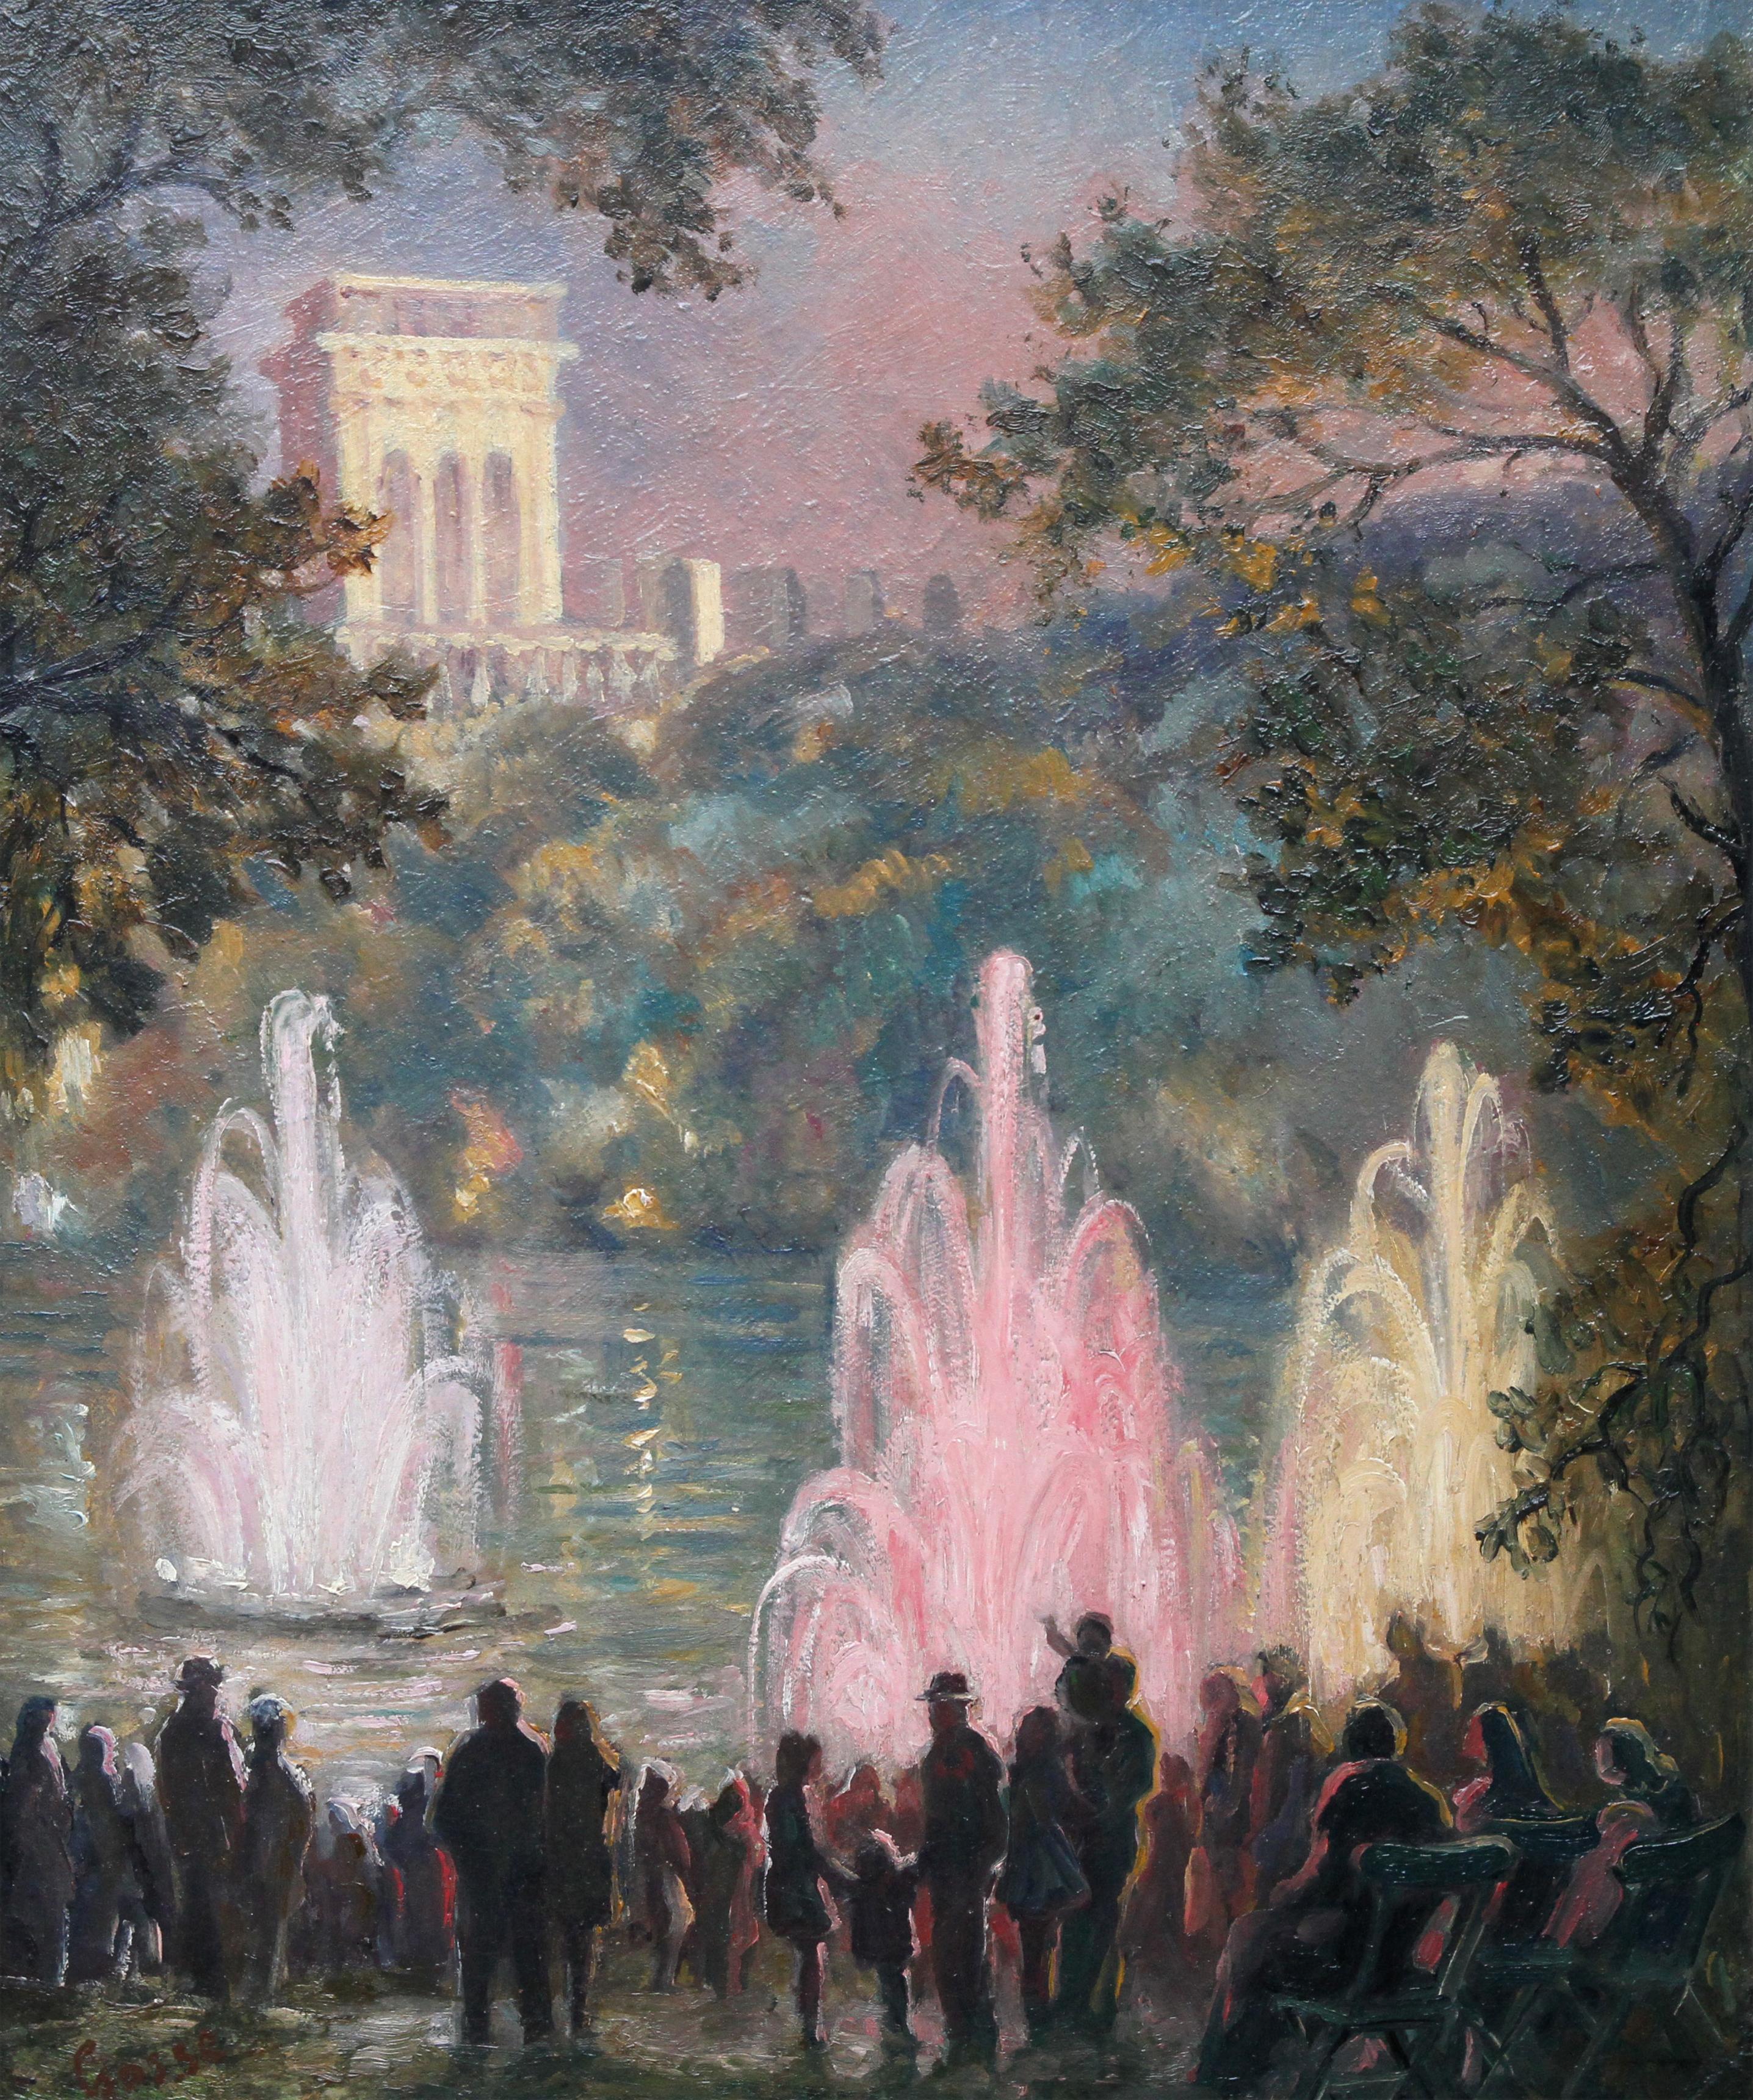 Fountains at Pernes Les Fountaines France Impressionist landscape oil painting  - Painting by Sylvia Gosse